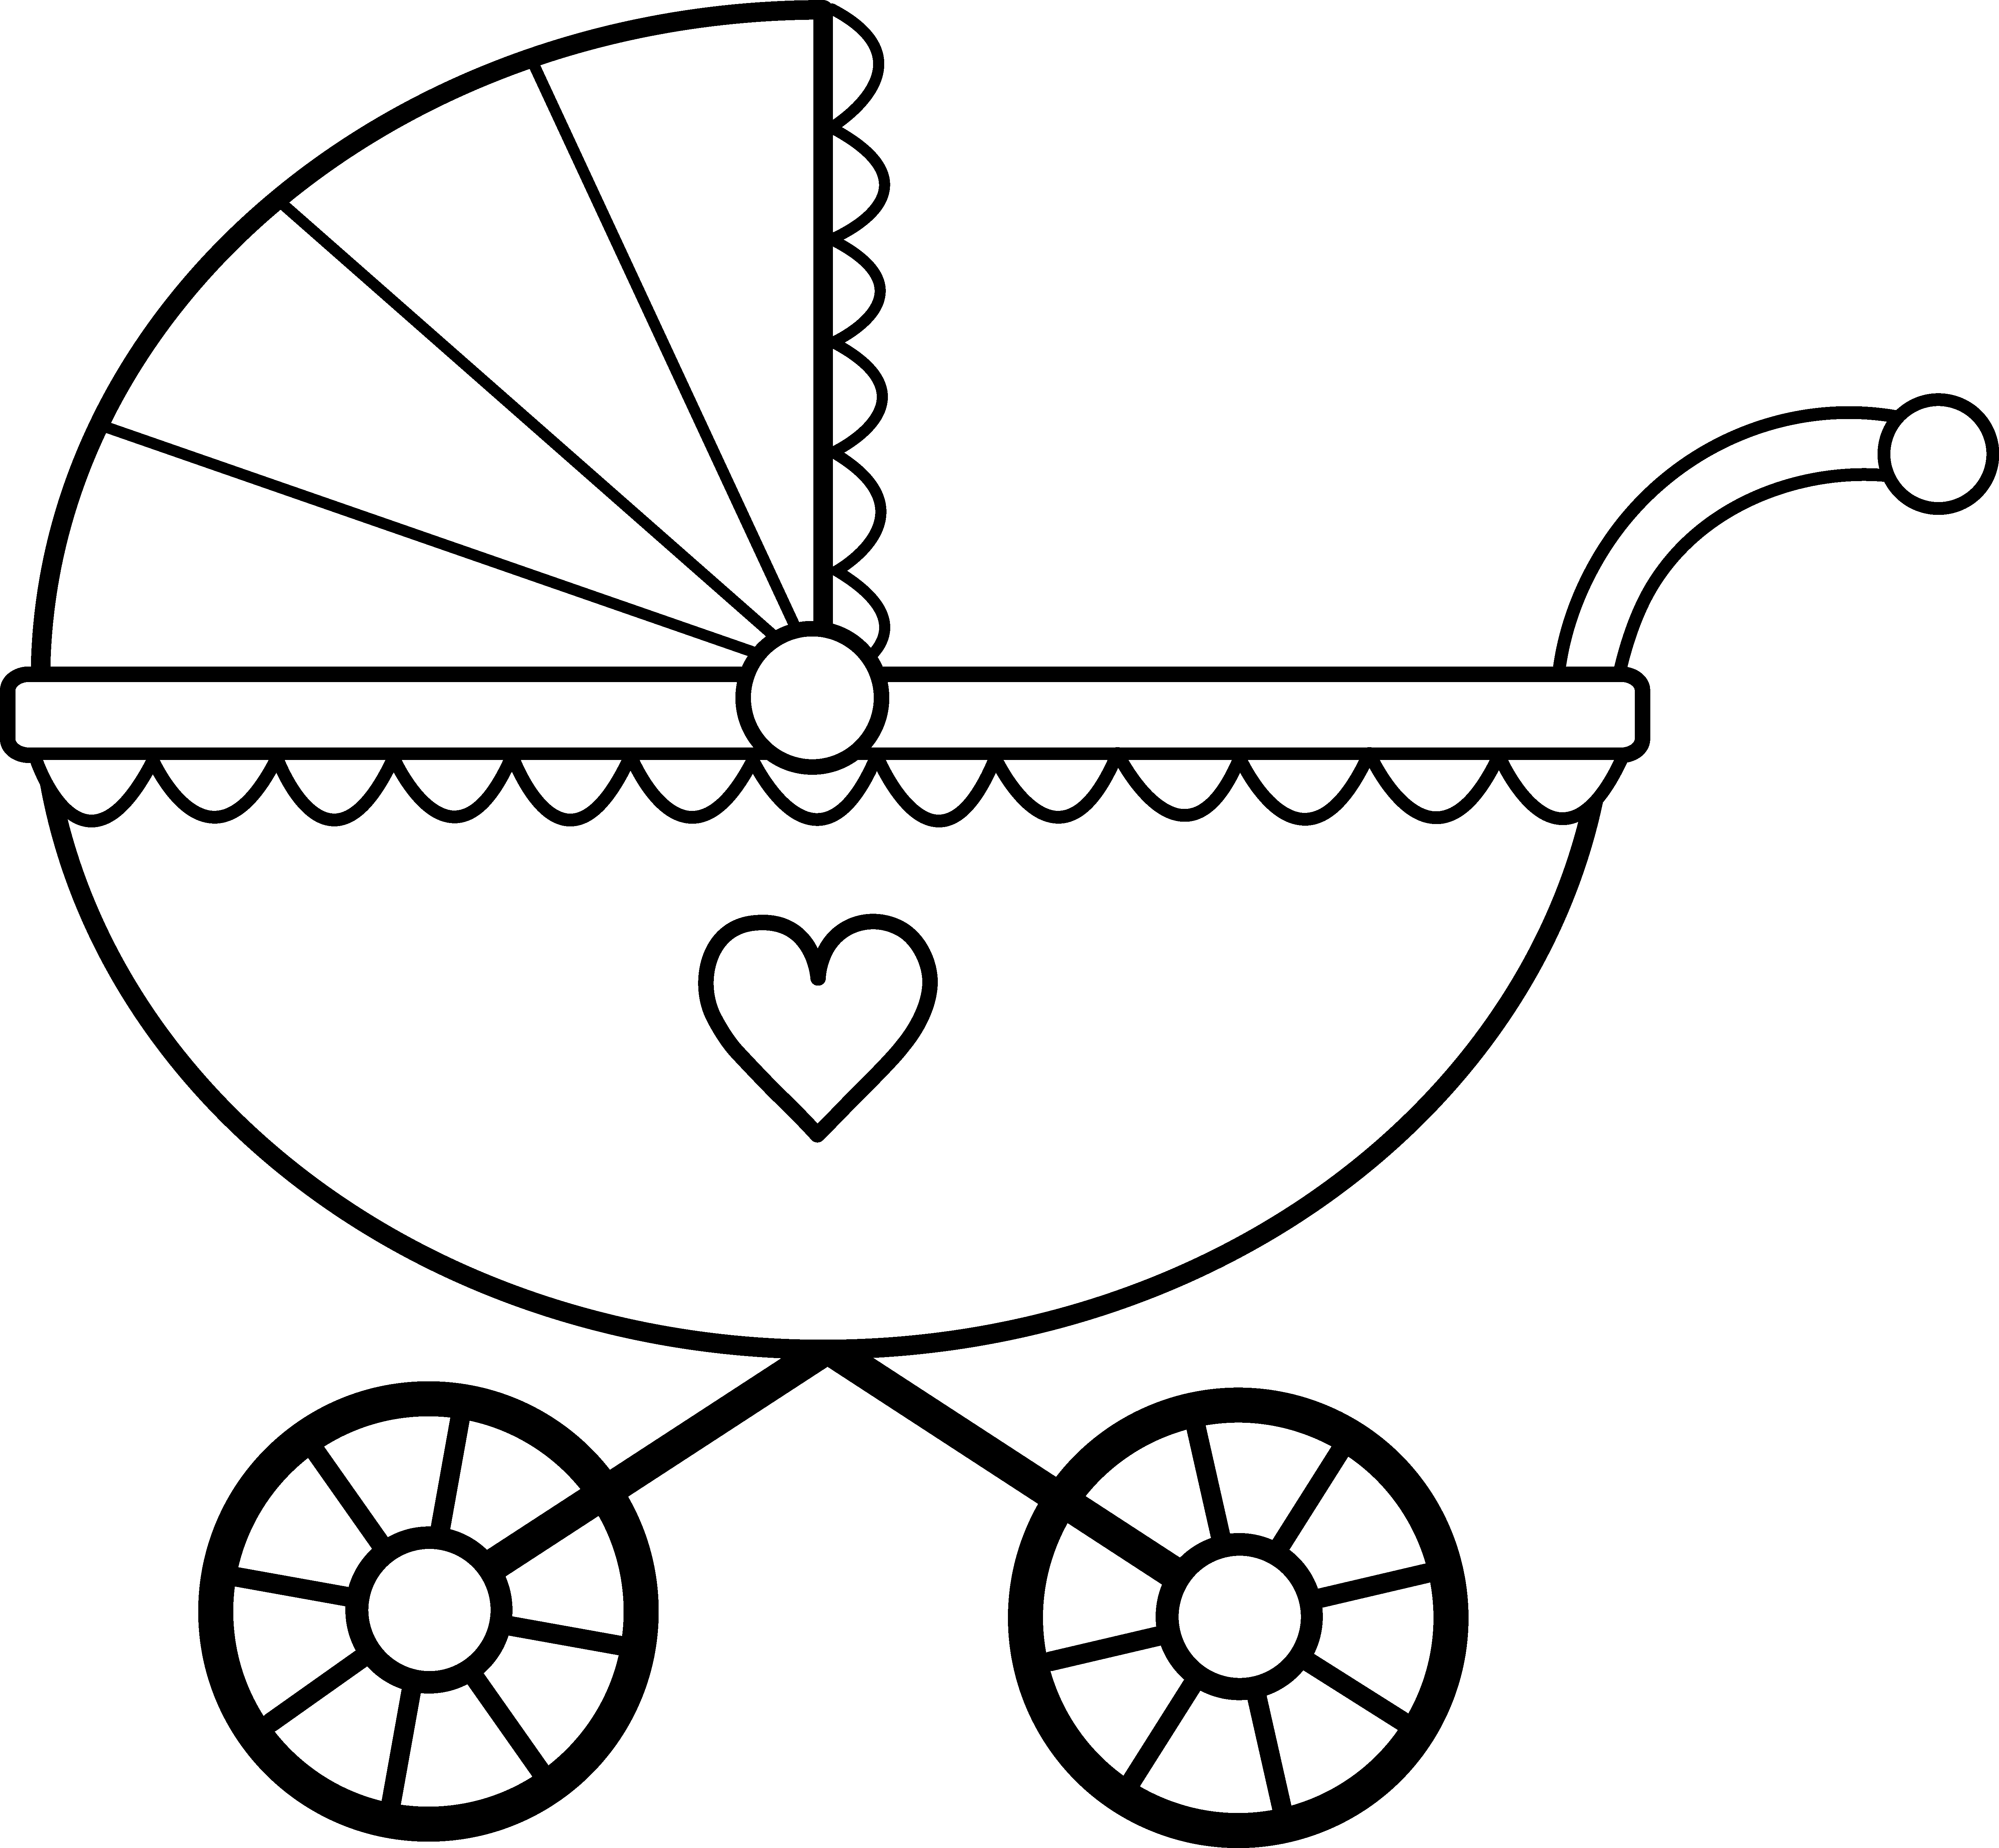 For Baby Shower - Coloring Pages for Kids and for Adults